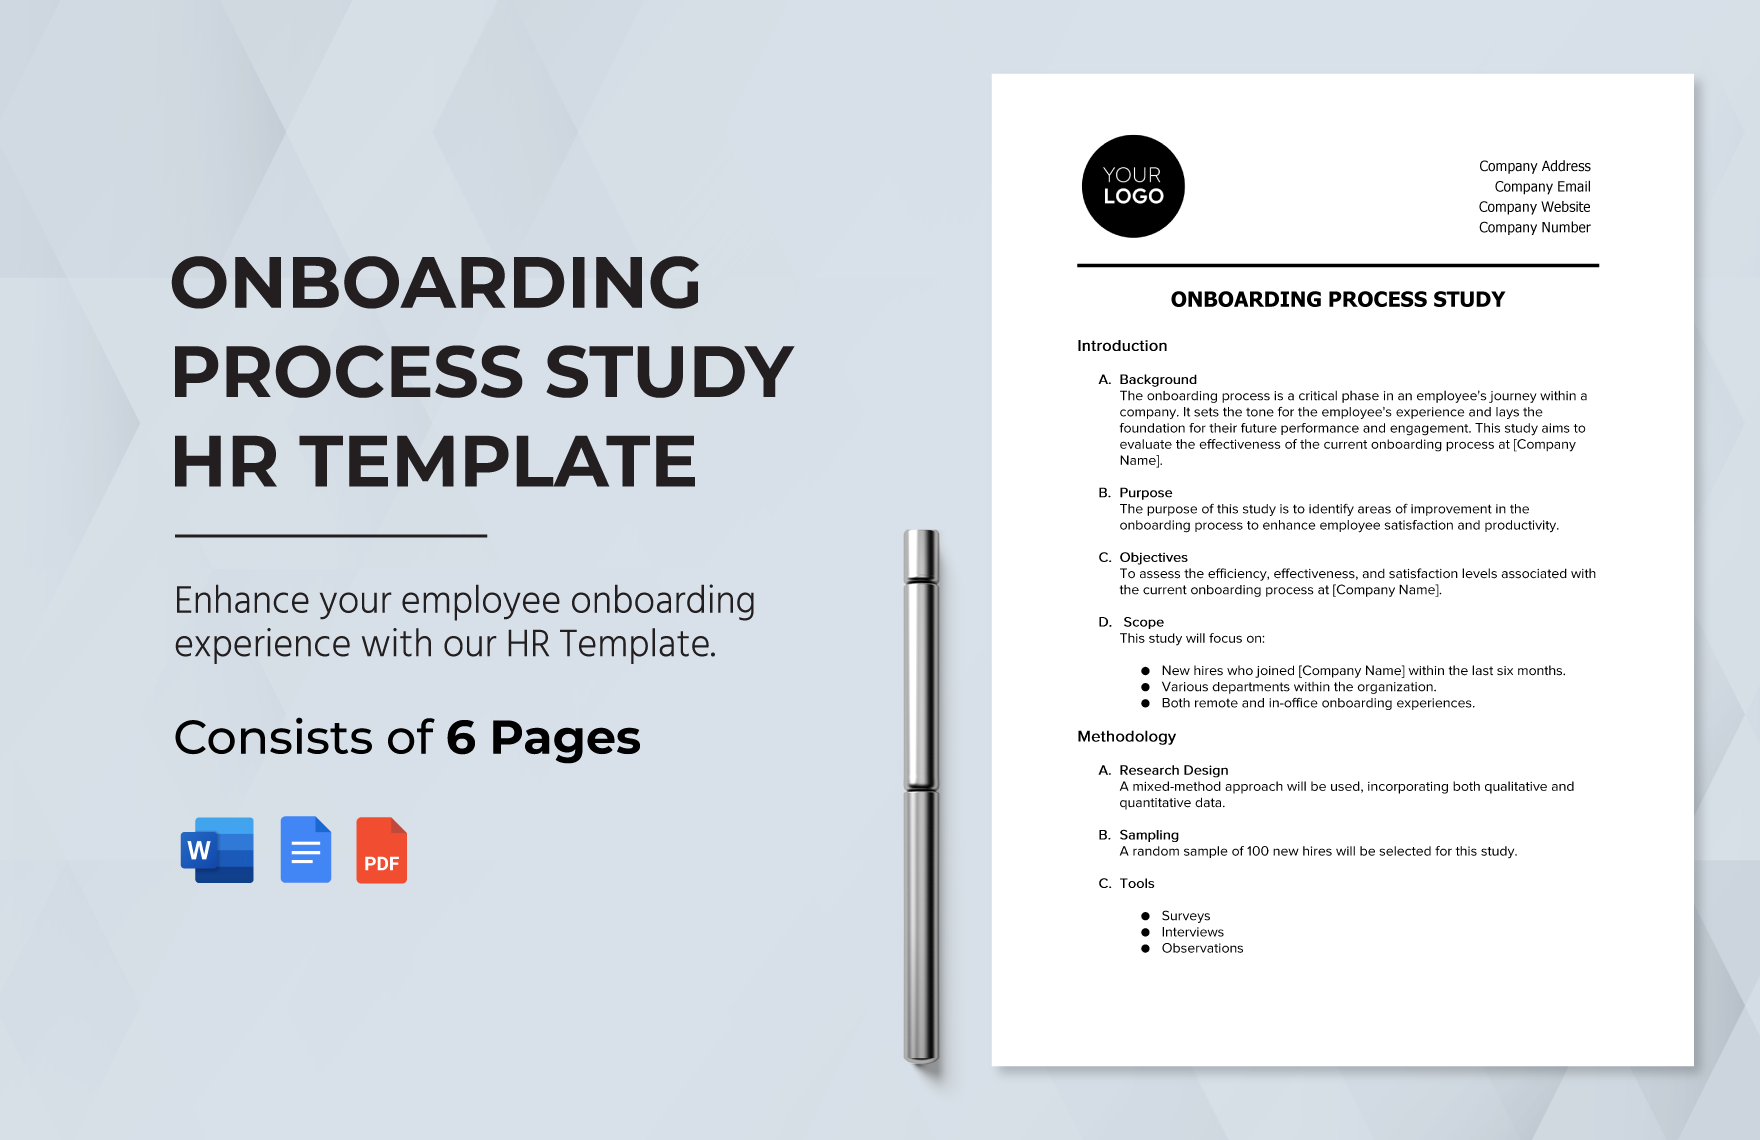 onboarding-process-study-hr-template